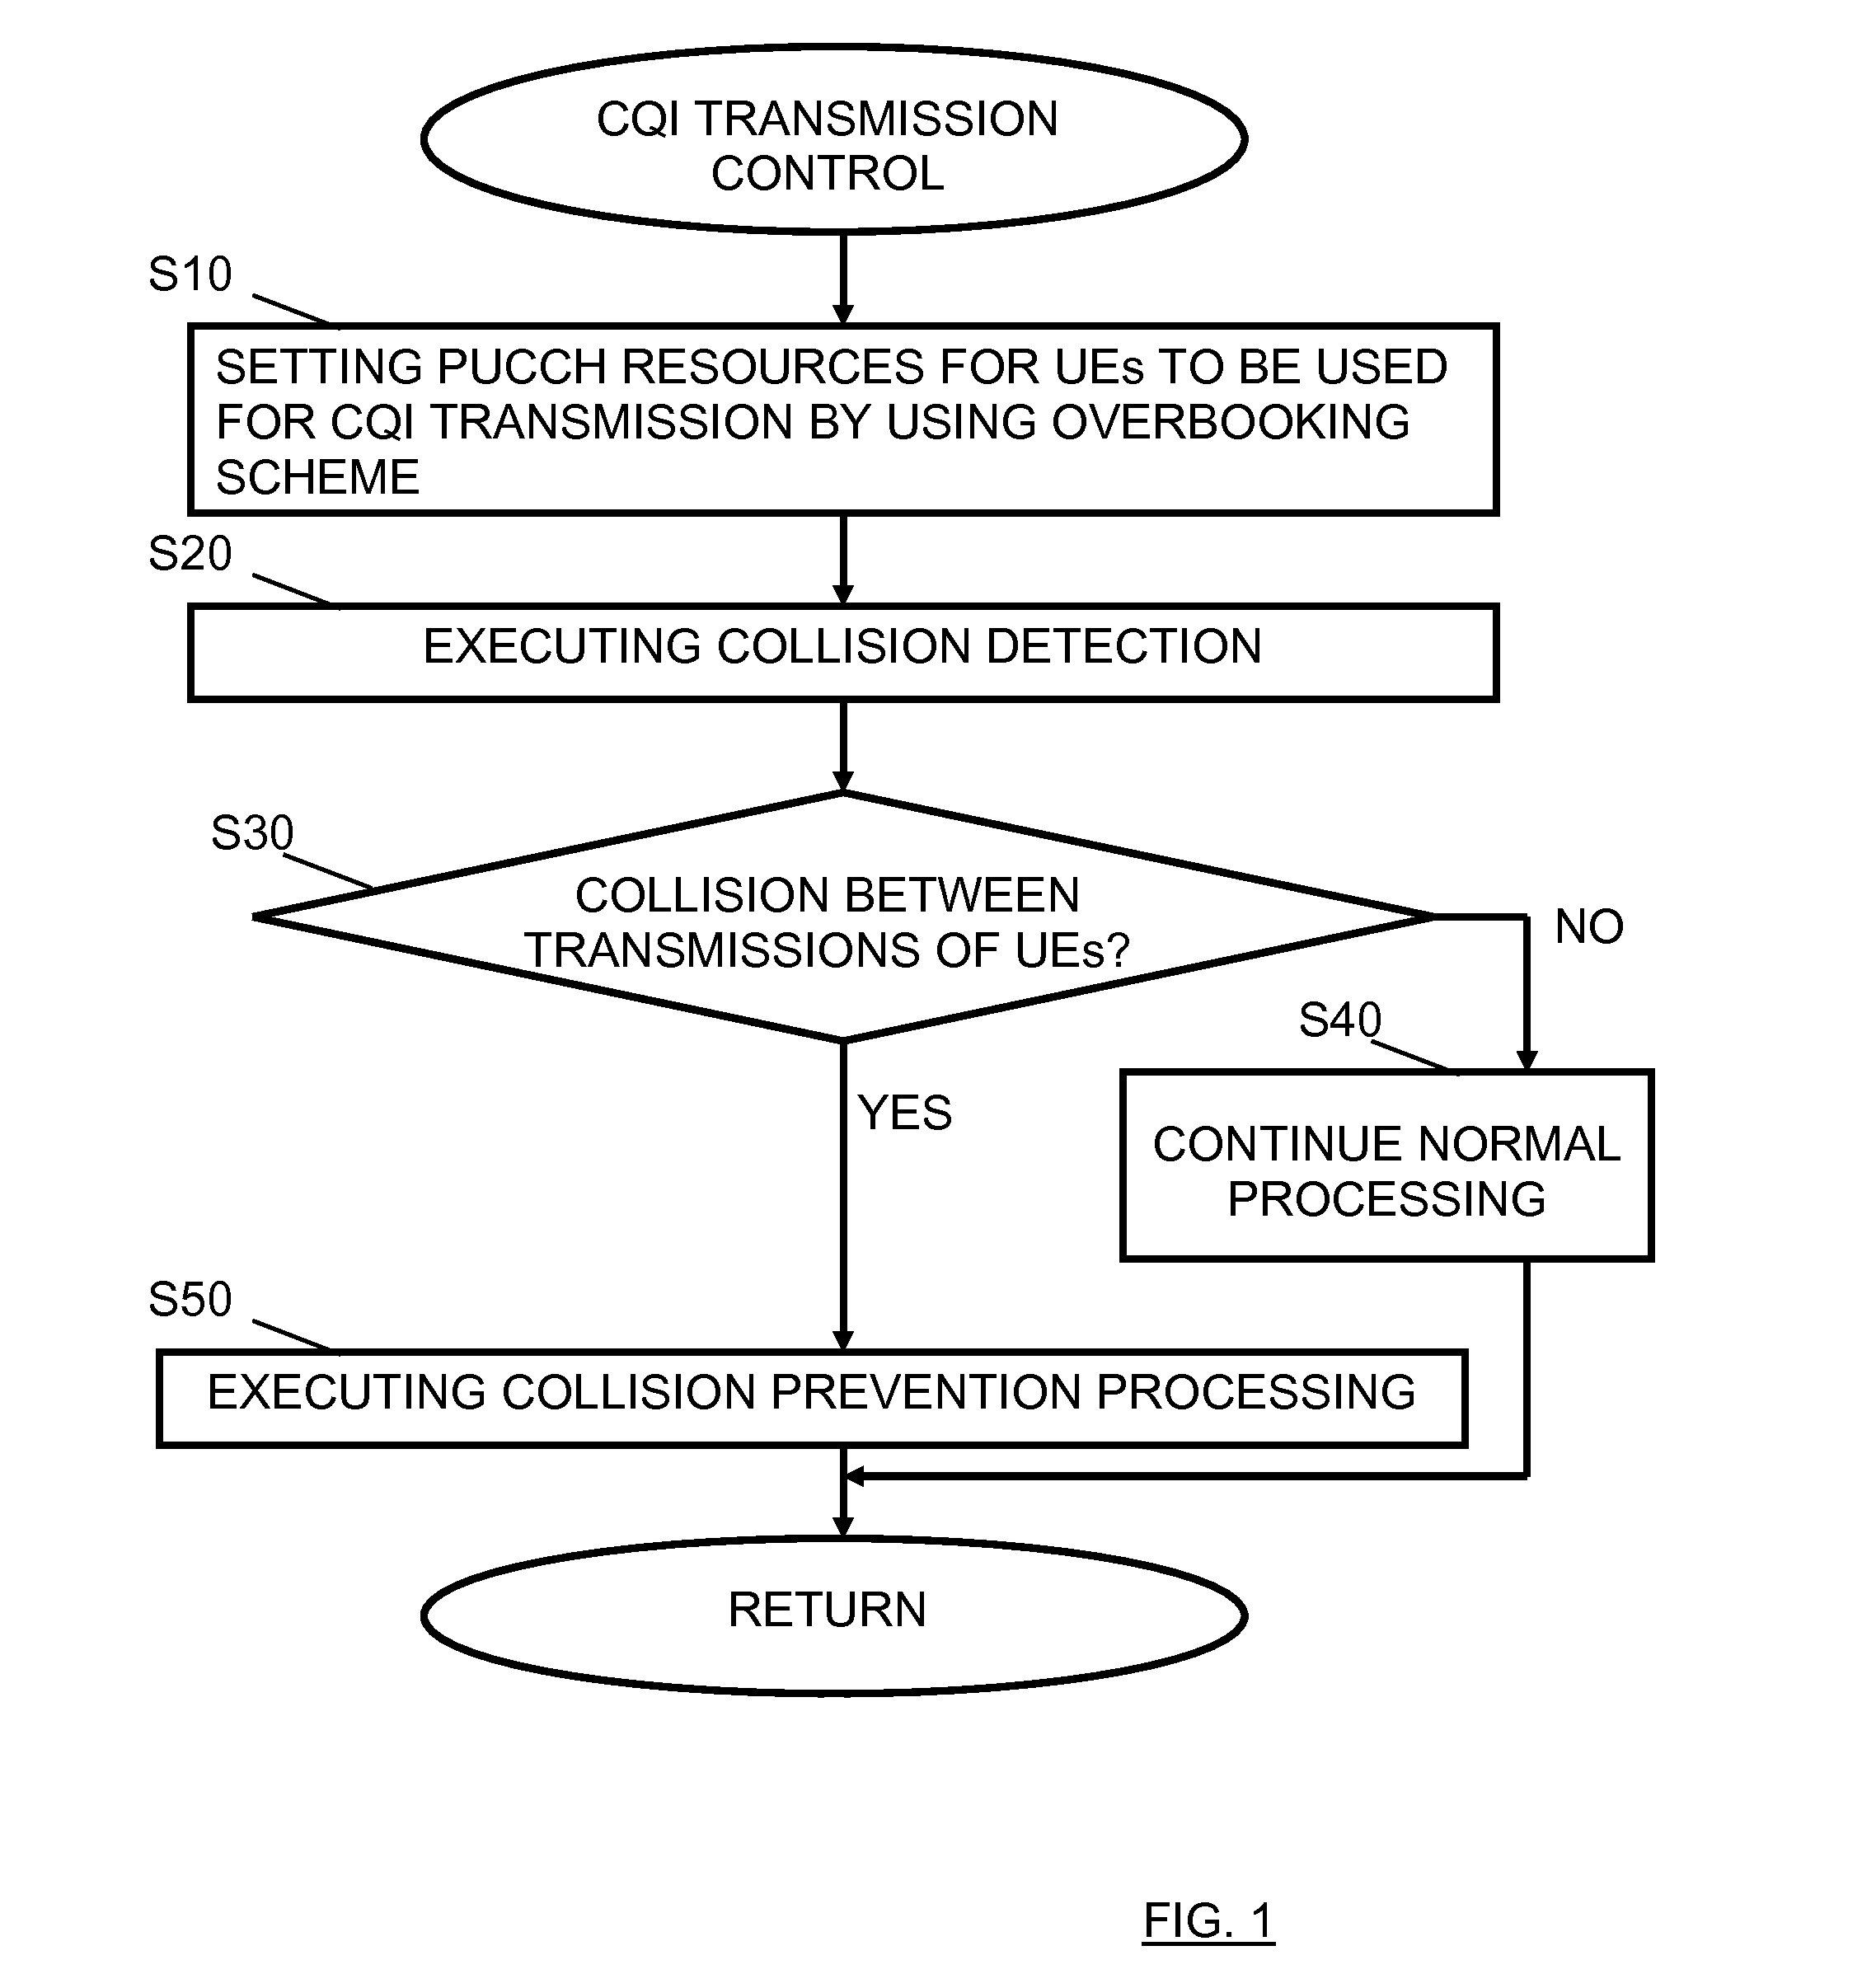 Resource Setting Control for Transmission Using Contention Based Resources